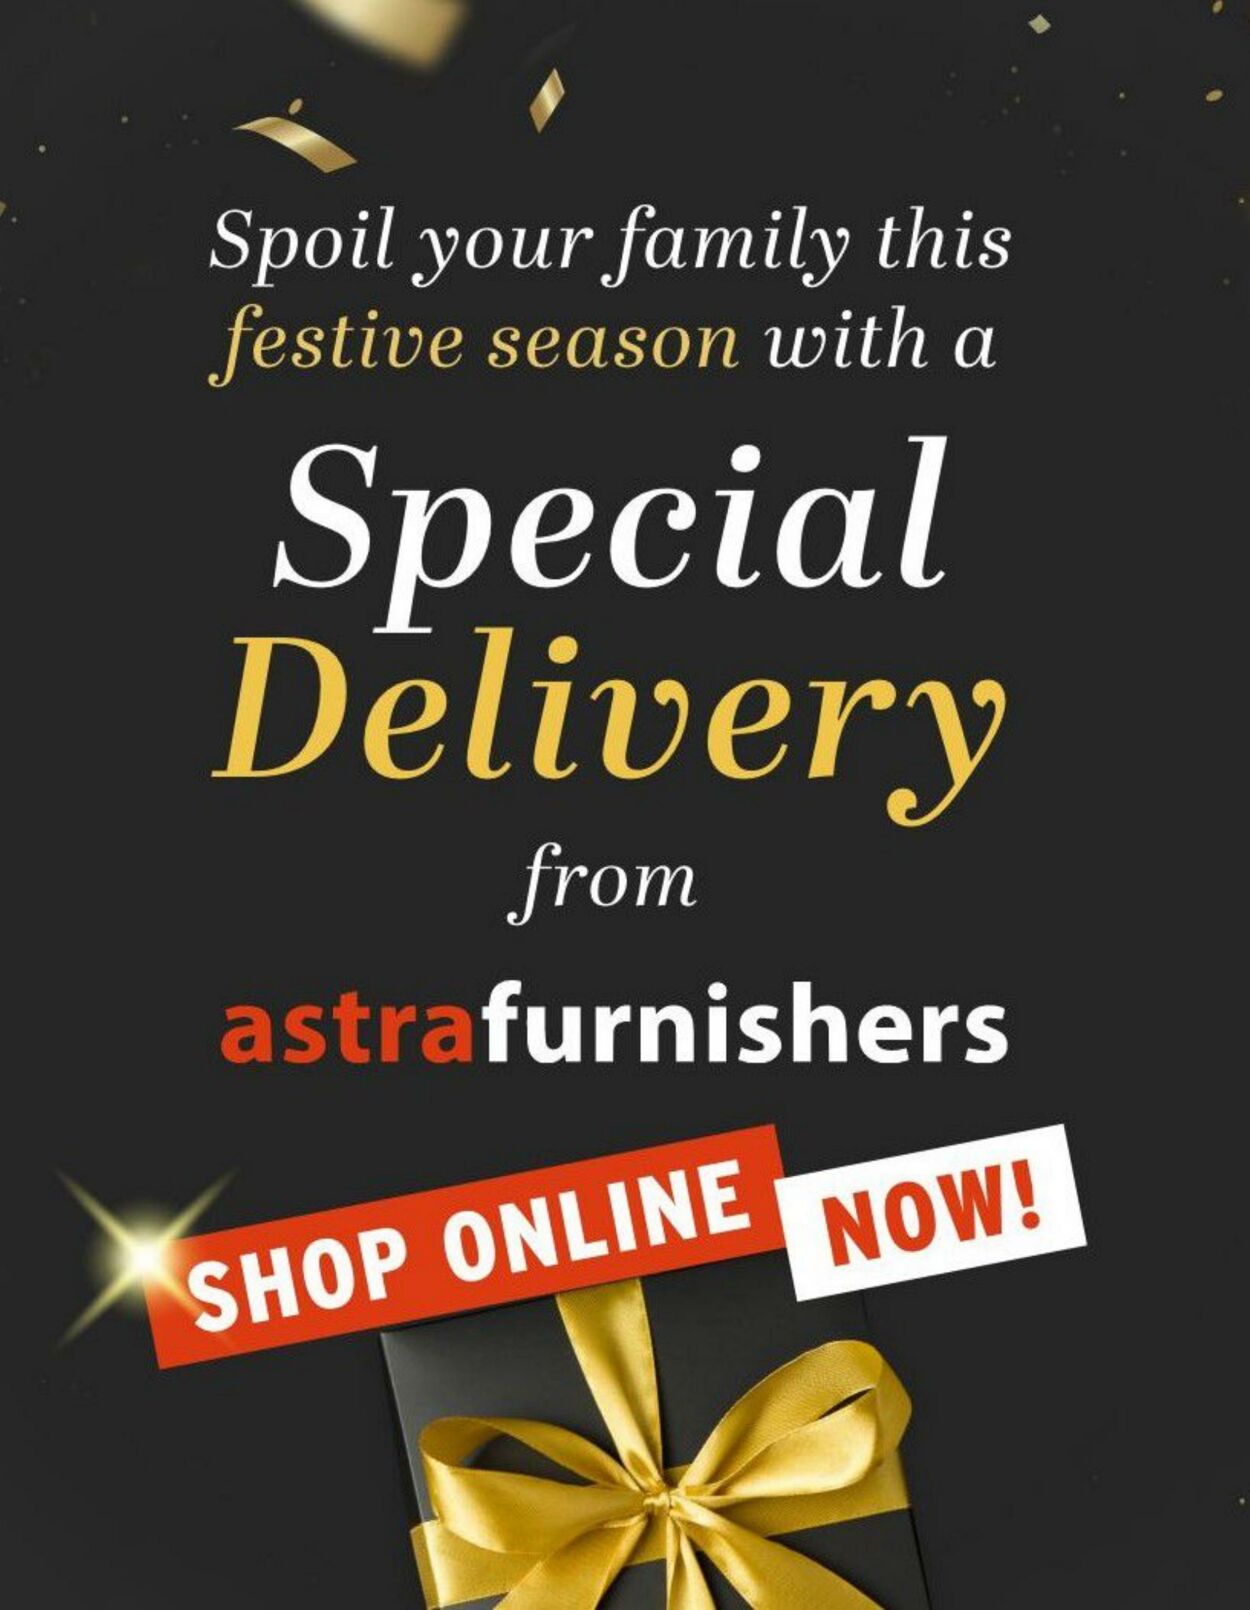 Special Astra Furnishers 23.05.2022 - 22.08.2022